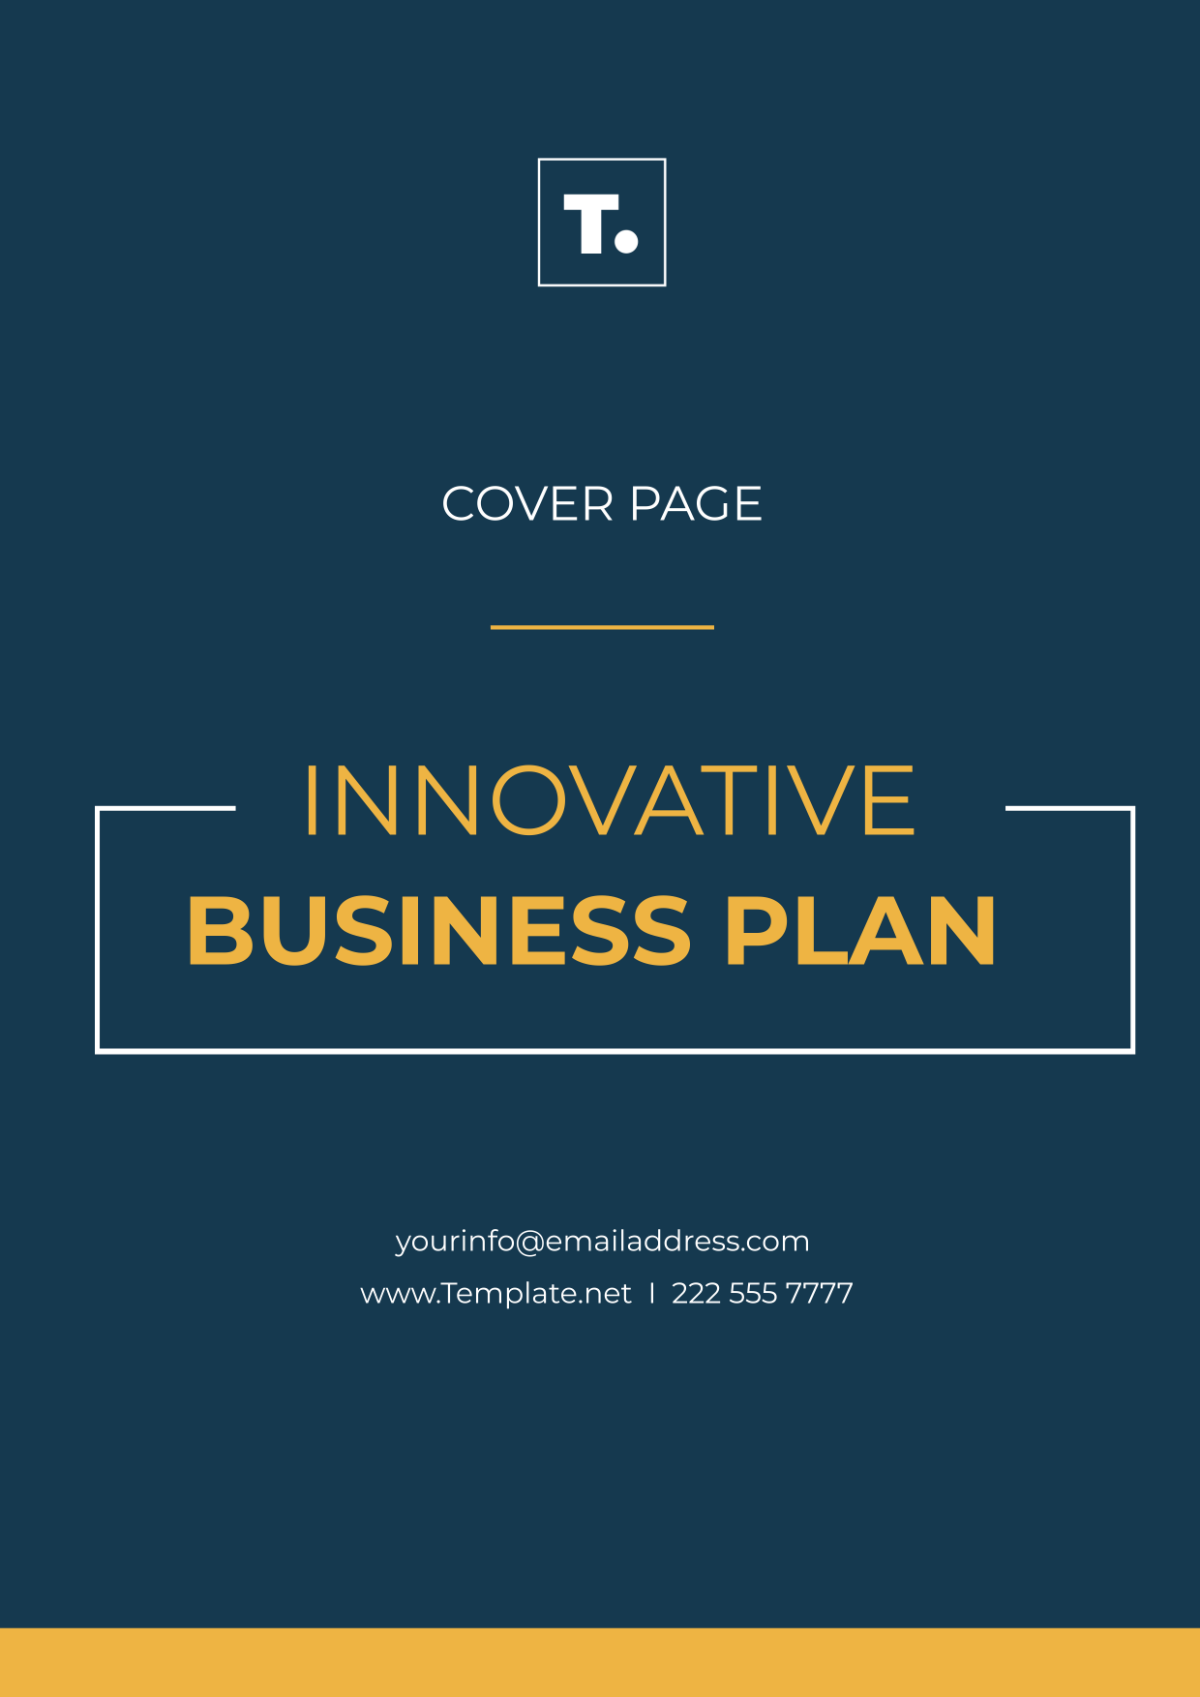 Business Plan Innovative Cover Page Template